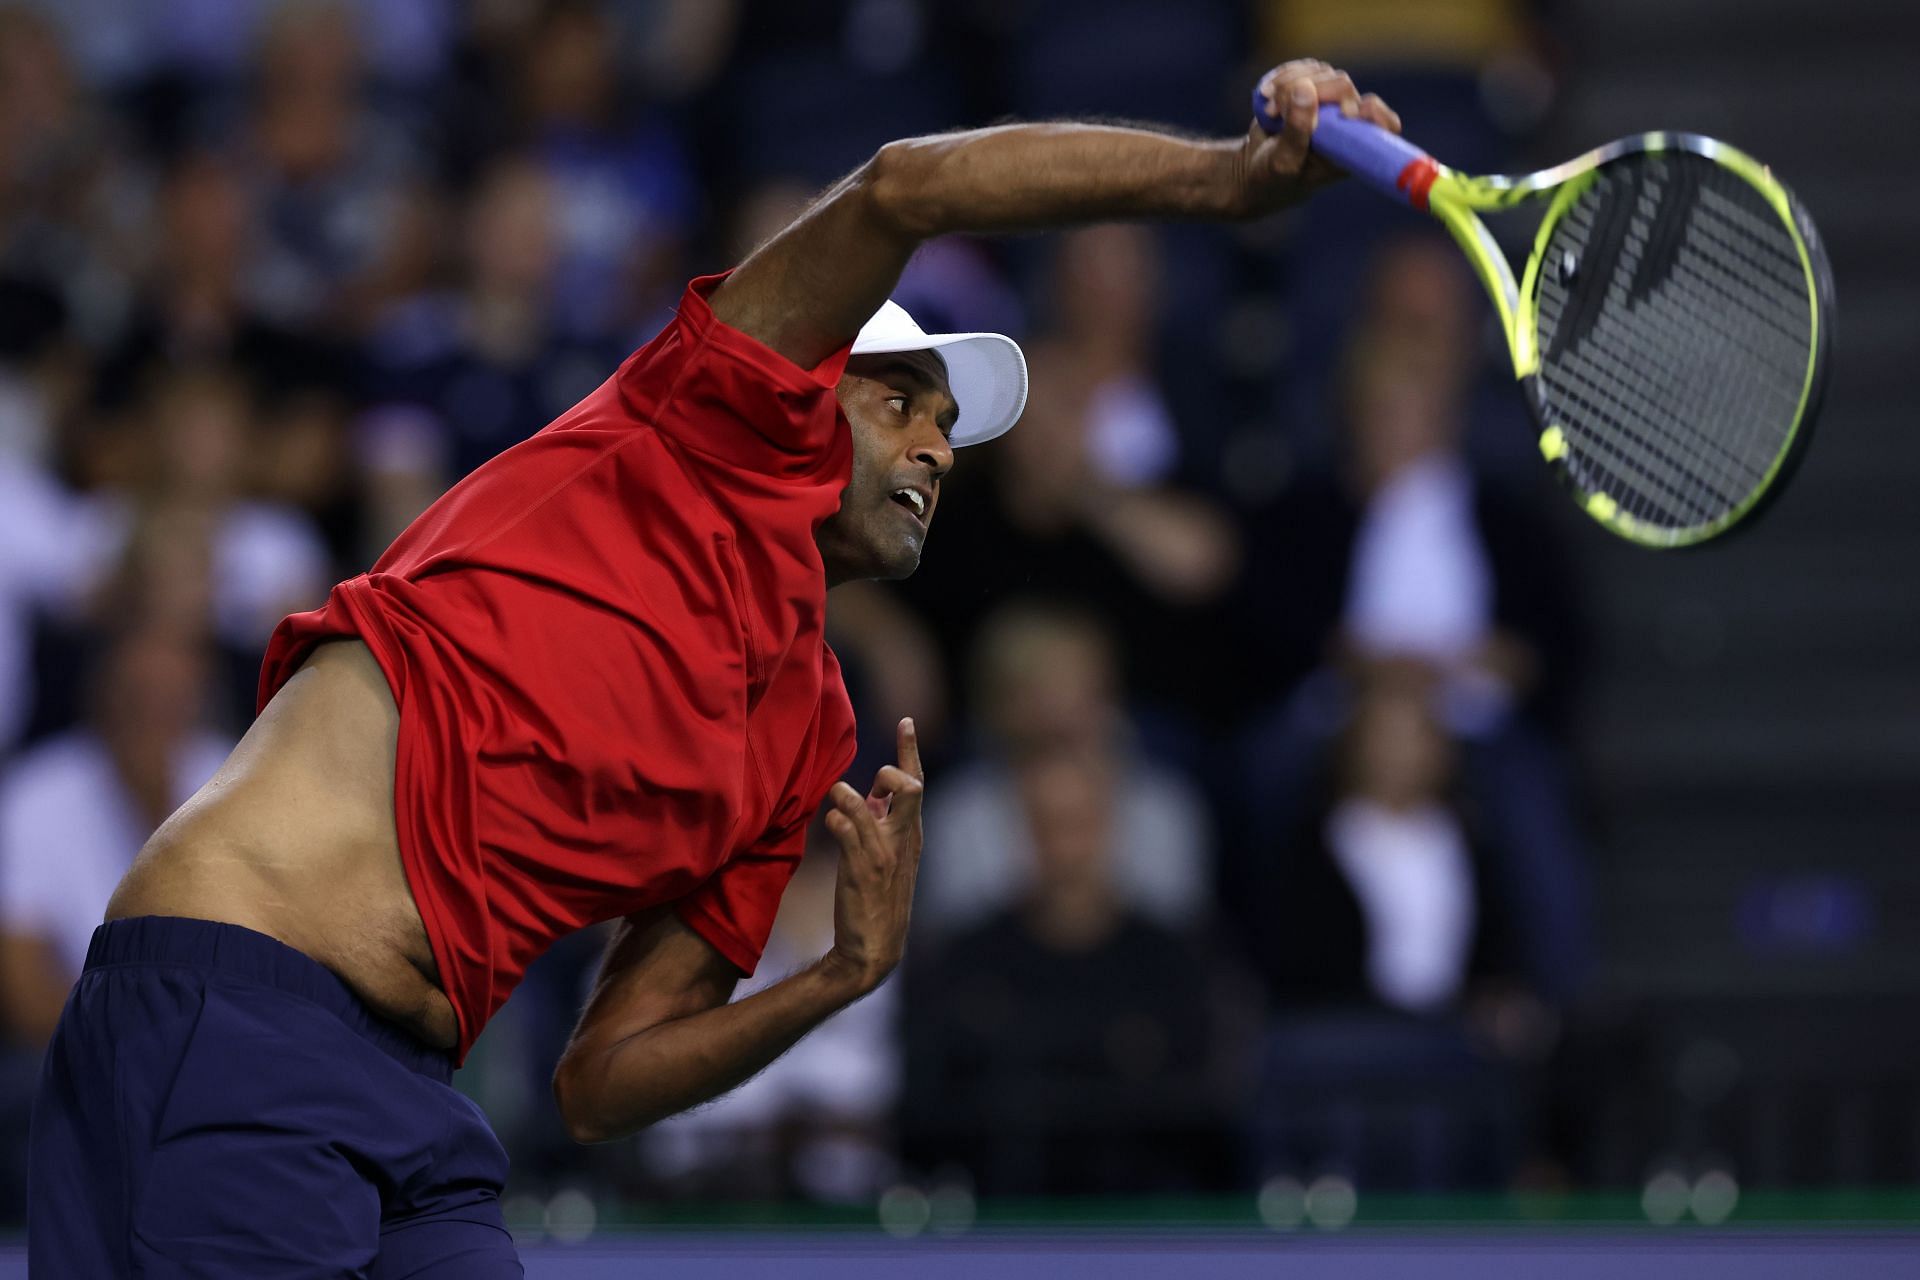 Rajeev Ram during a Davis Cup group stage match